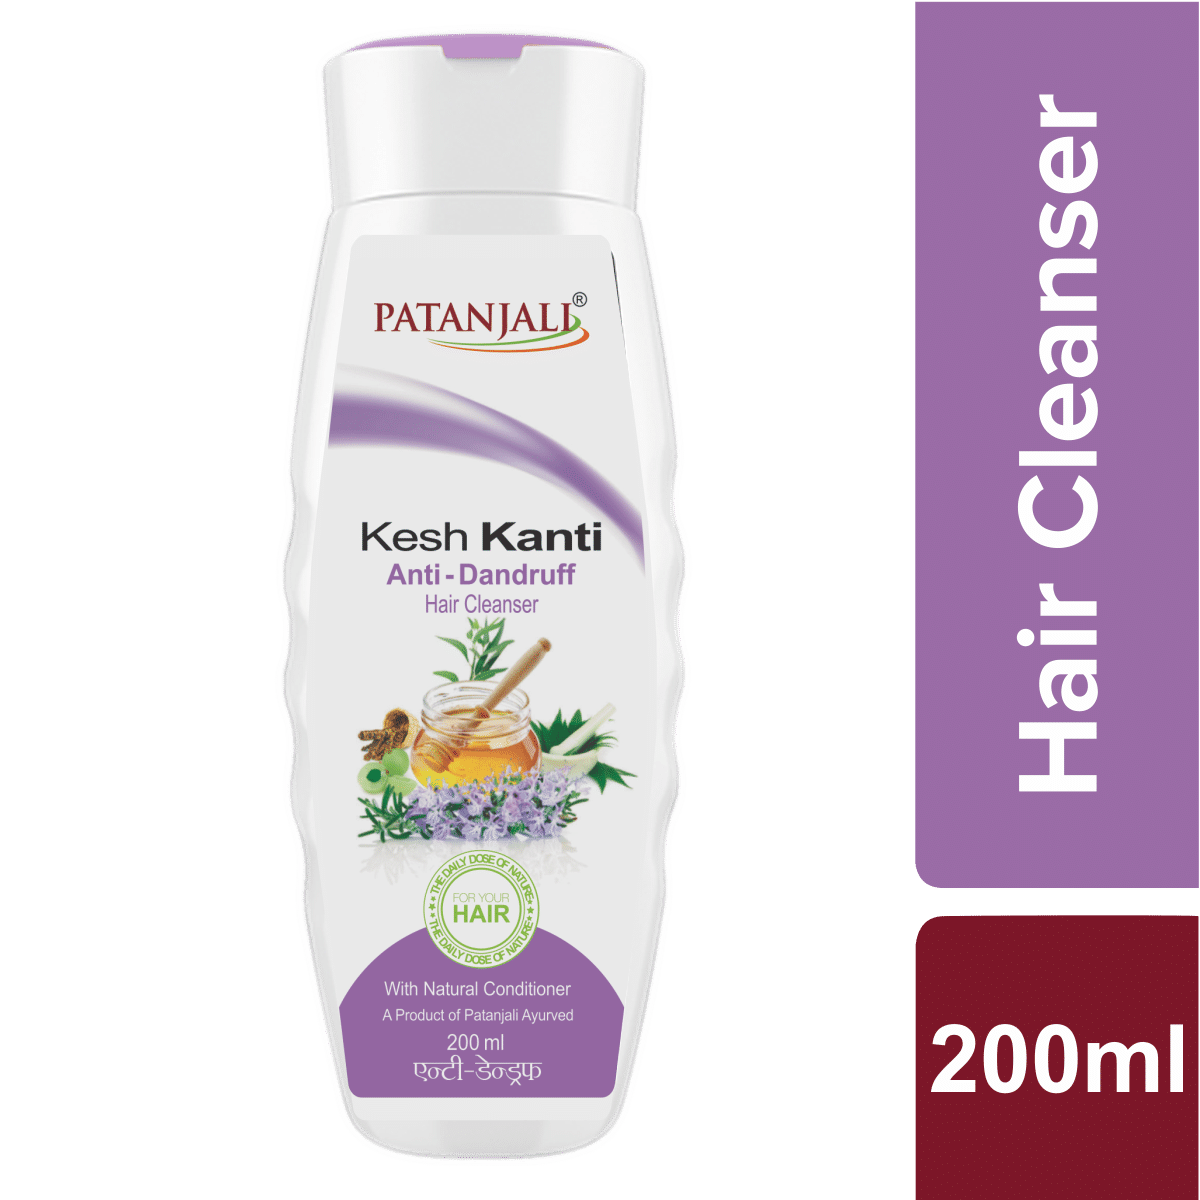 Patanjali Kesh Kanti Anti-Dandruff Hair Cleanser, 200 ml Price, Uses, Side  Effects, Composition - Apollo Pharmacy